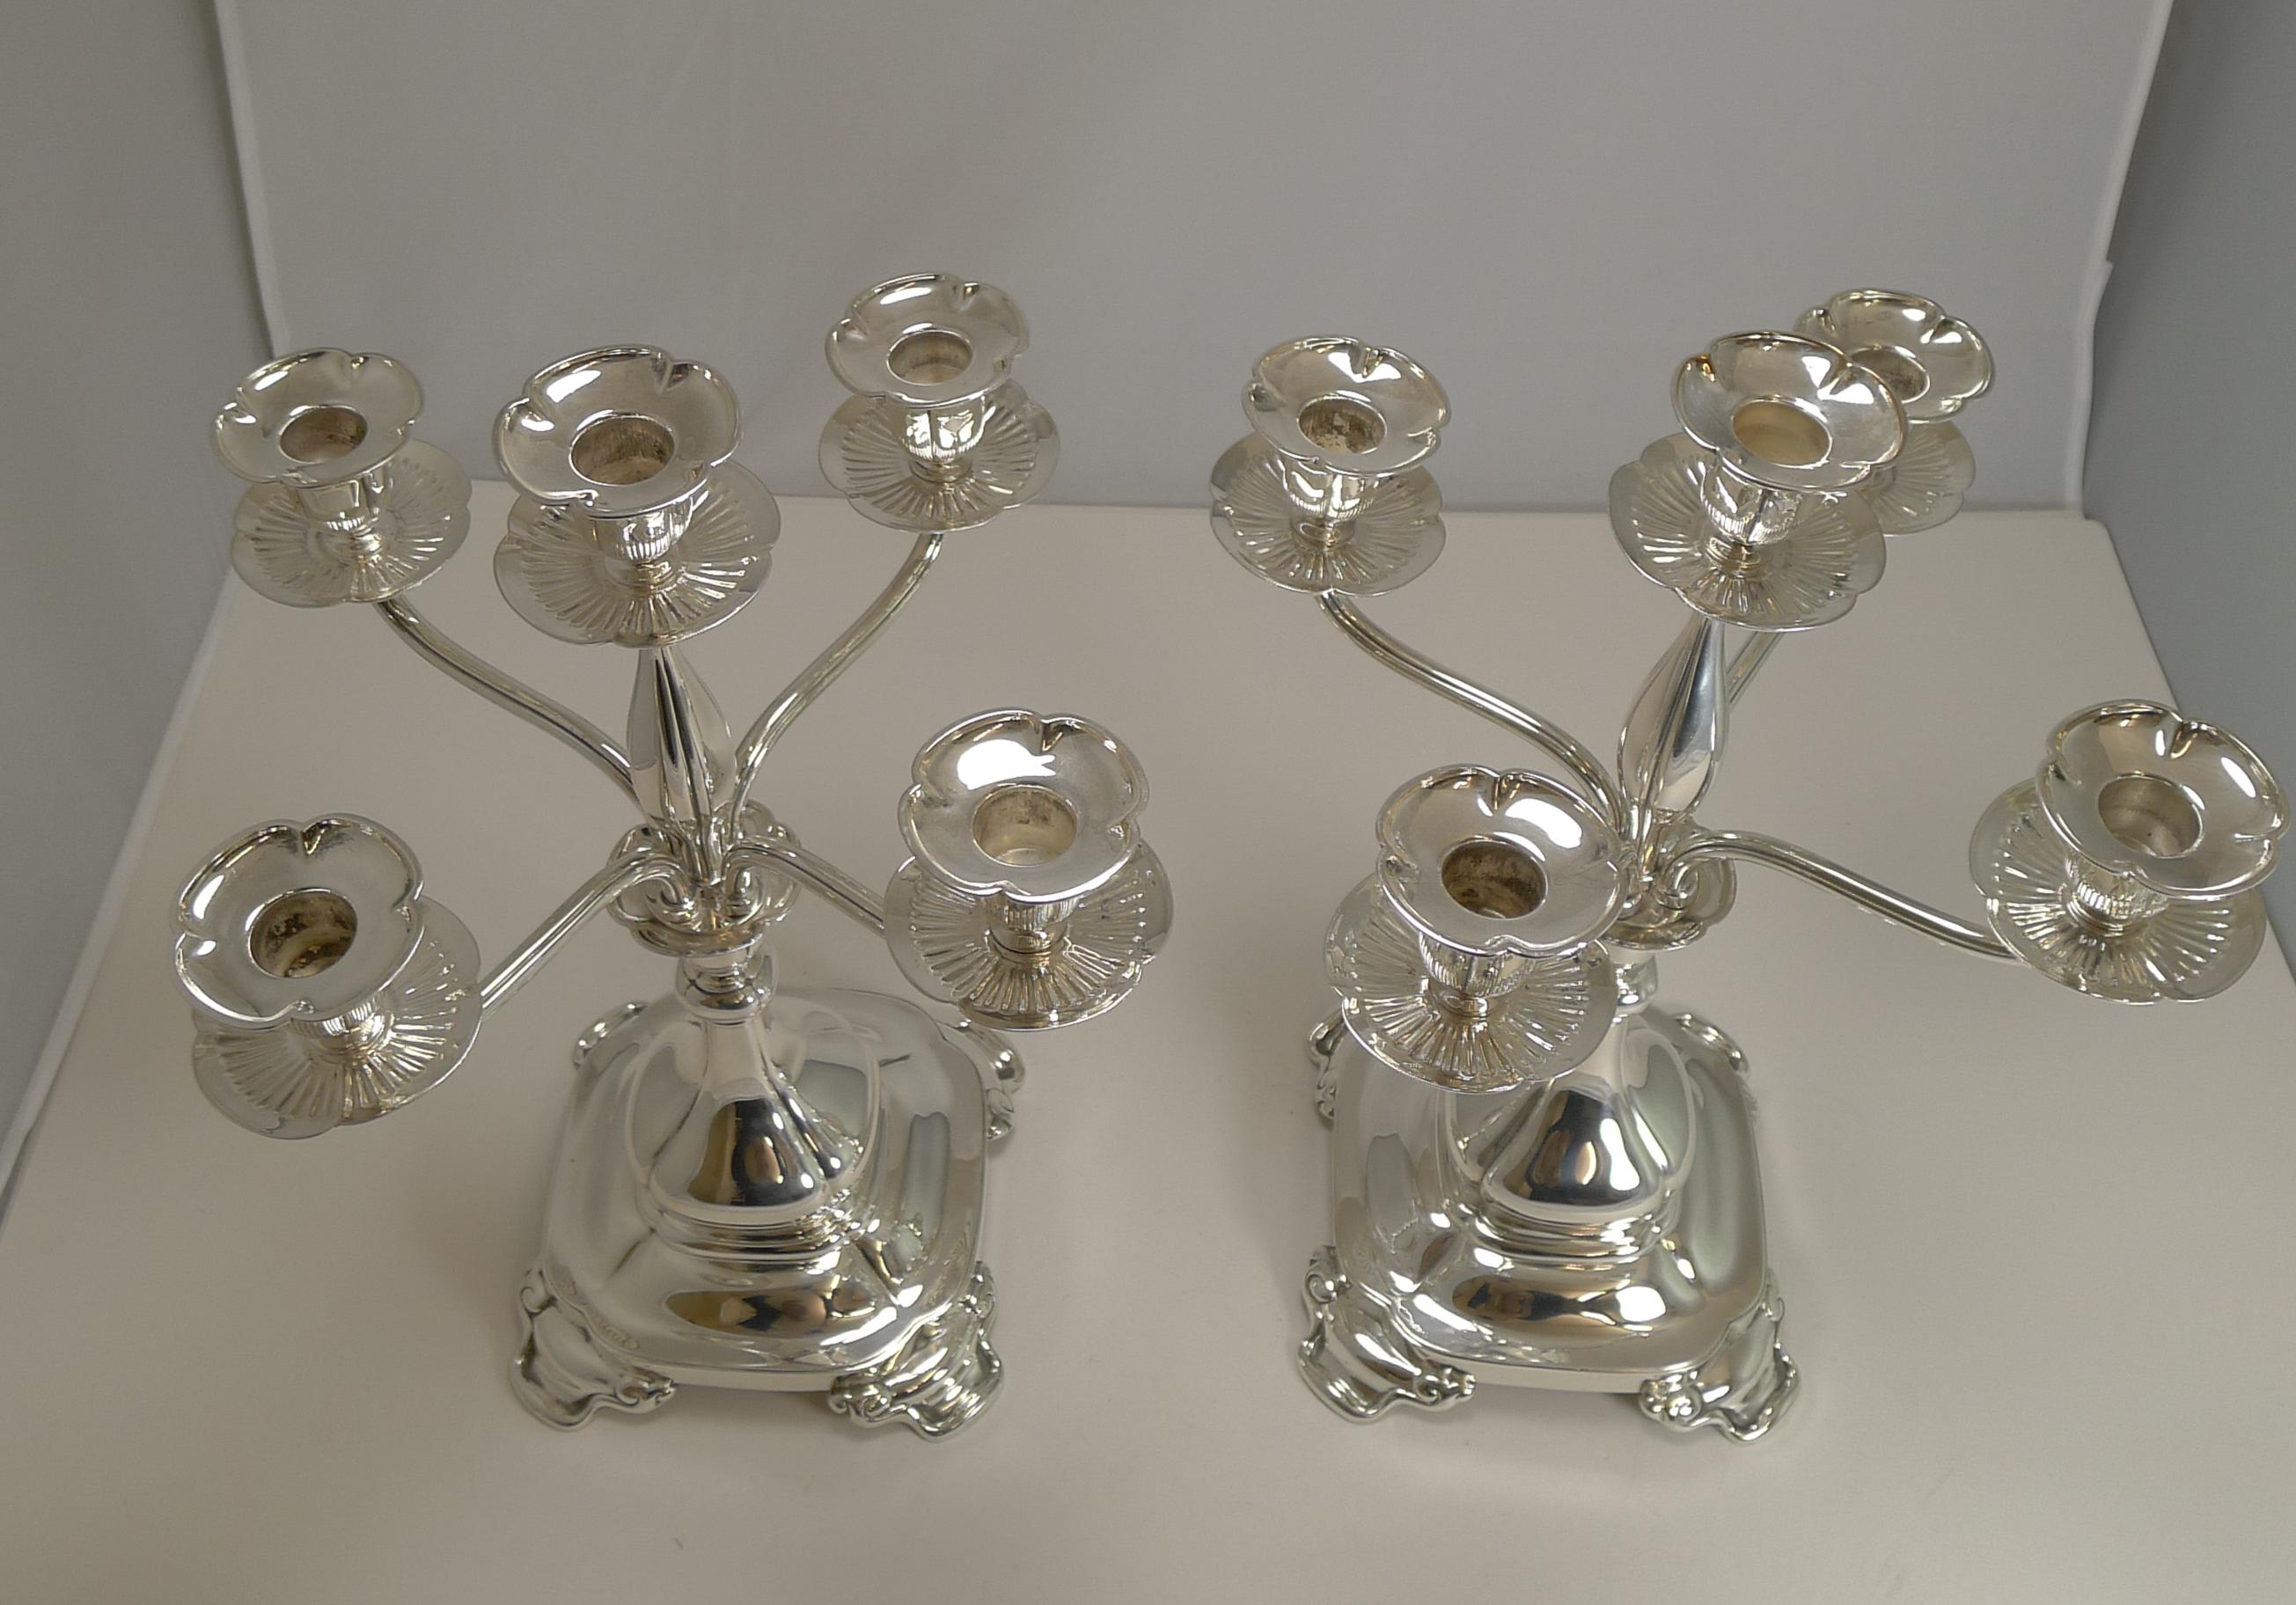 A fabulous pair of American Tiffany candelabra with an Art Nouveau desigh with the four organic feet to each square base and the elegantly shaped central light.

Both the removable sconces and drip trays have a naturalistic floral form

The